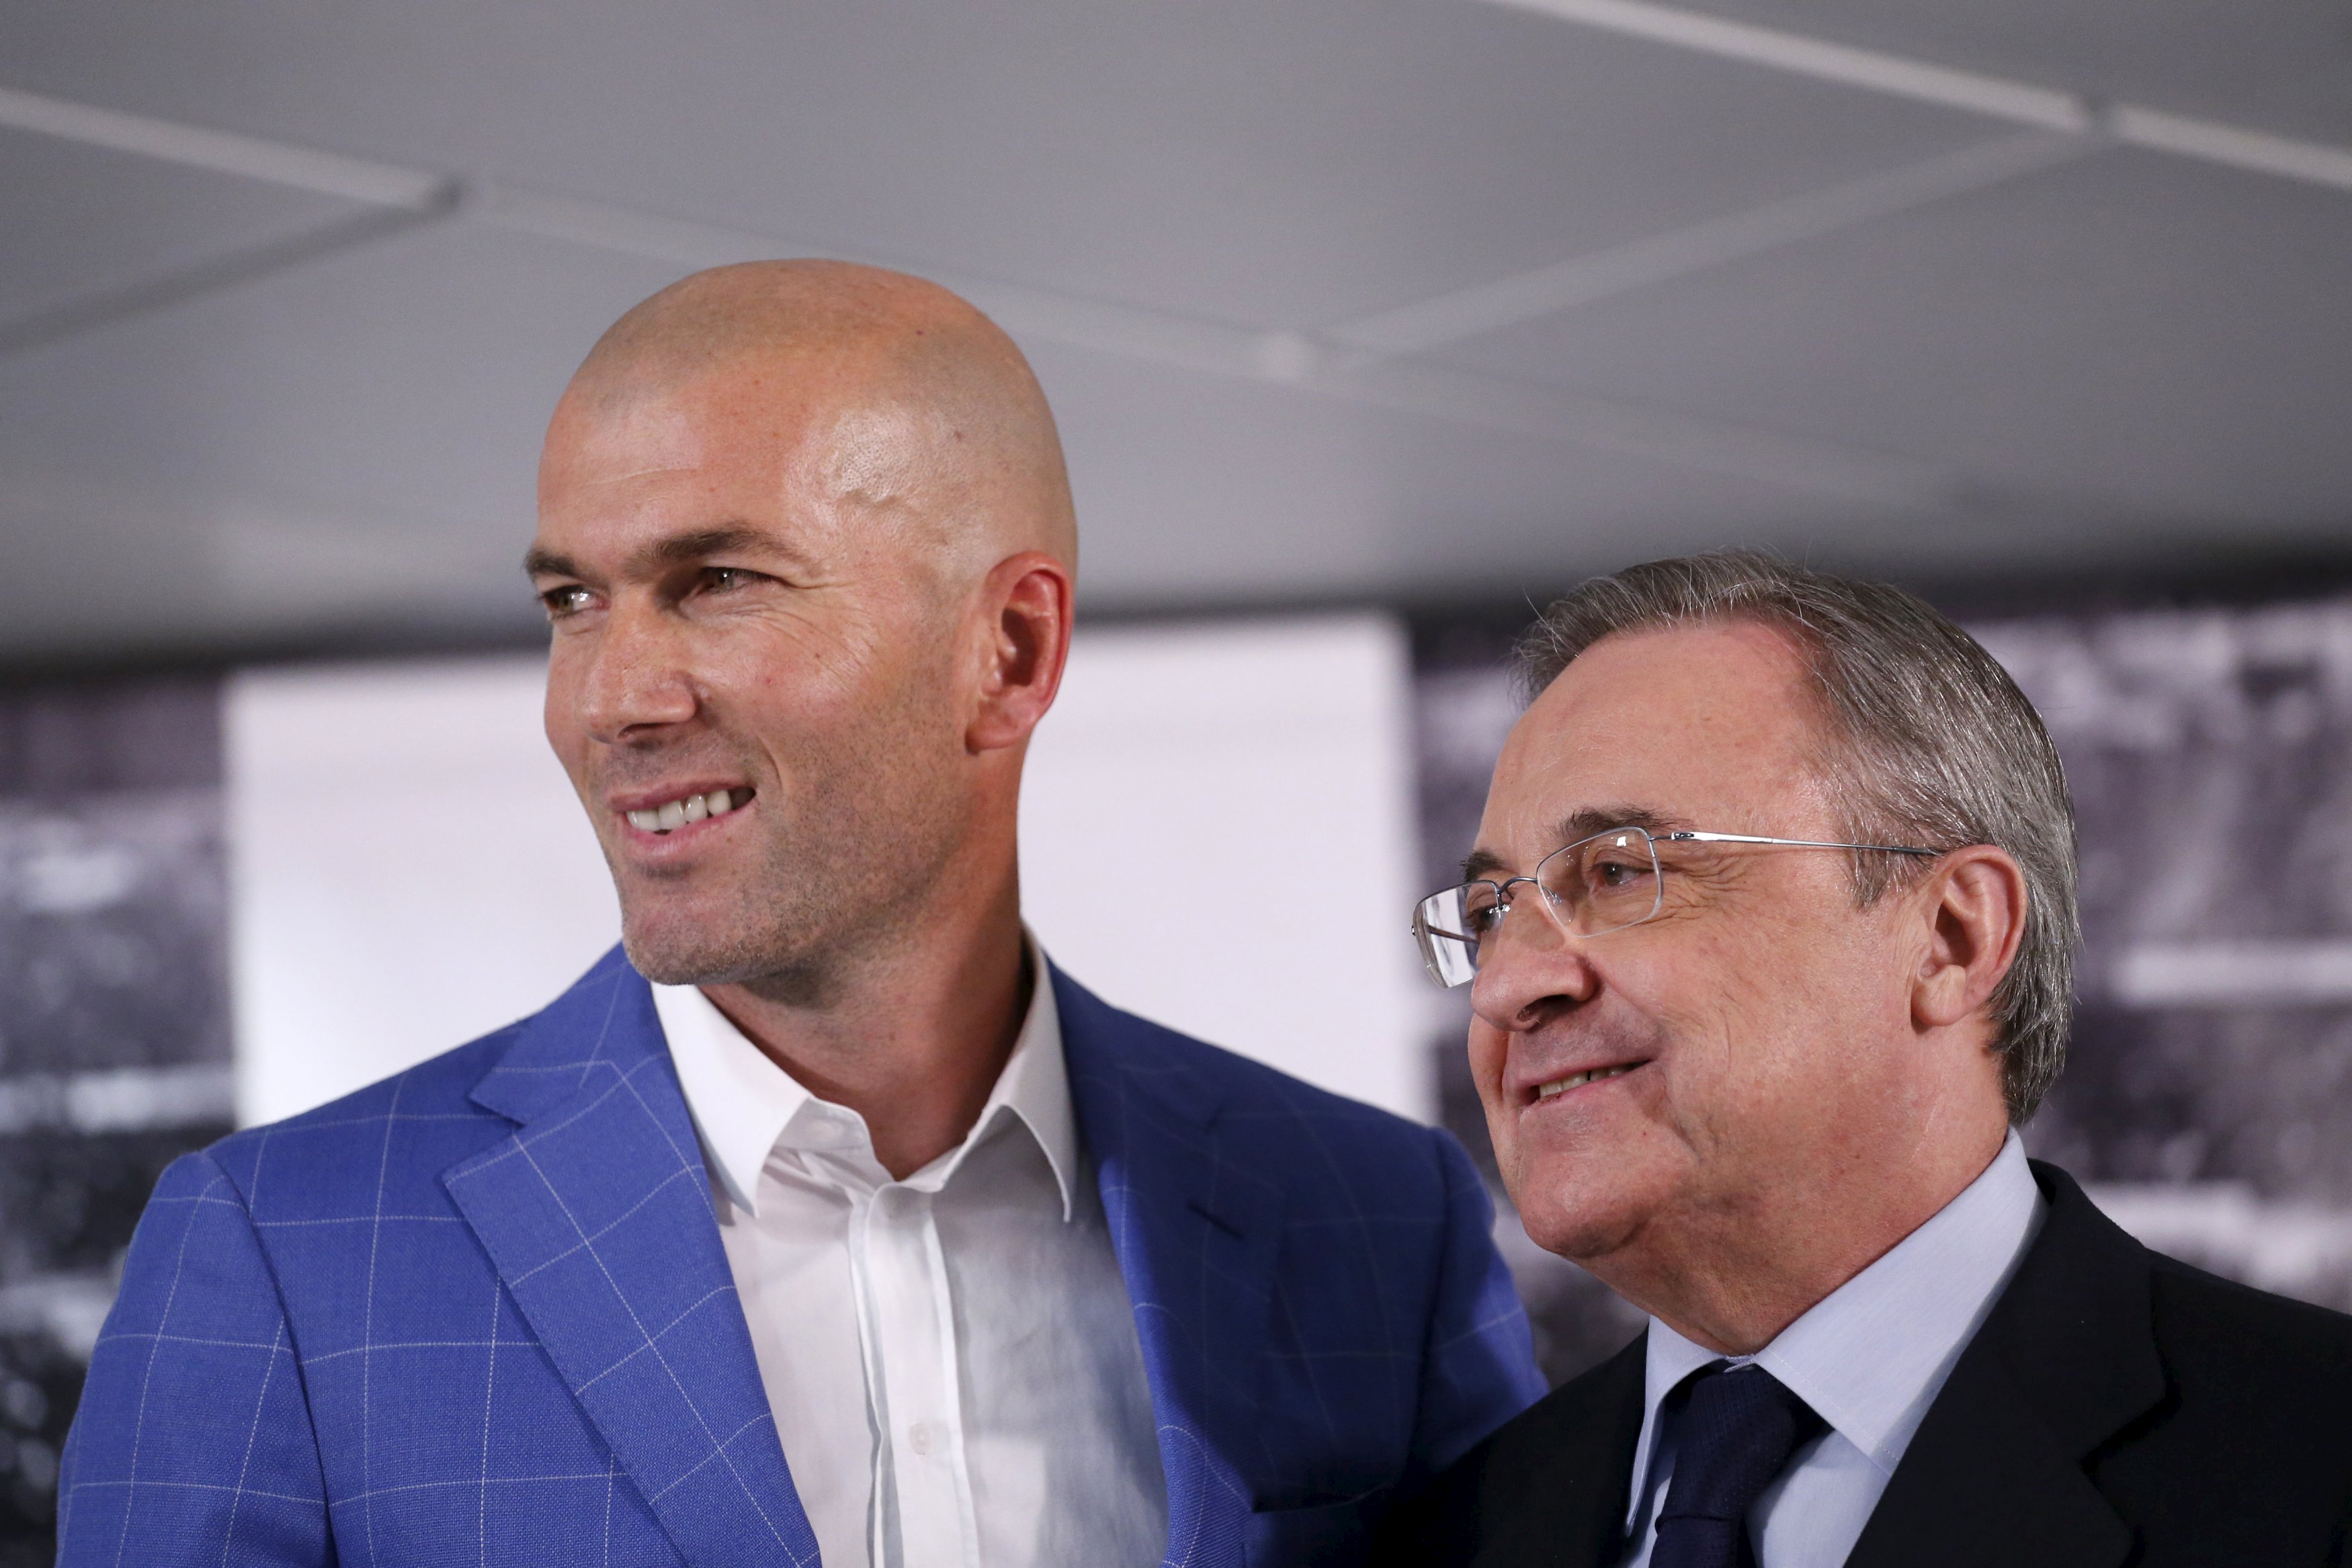 Real Madrid's new coach Zinedine Zidane (L) and Real Madrid's President Florentino Perez pose for the media at Santiago Bernabeu stadium in Madrid, Spain, January 4, 2016. Real Madrid have sacked coach Rafa Benitez after less than half a season in charge and promoted former France and Real great Zidane from the B team to replace him, president Florentino Perez said on Monday. REUTERS/Juan Medina